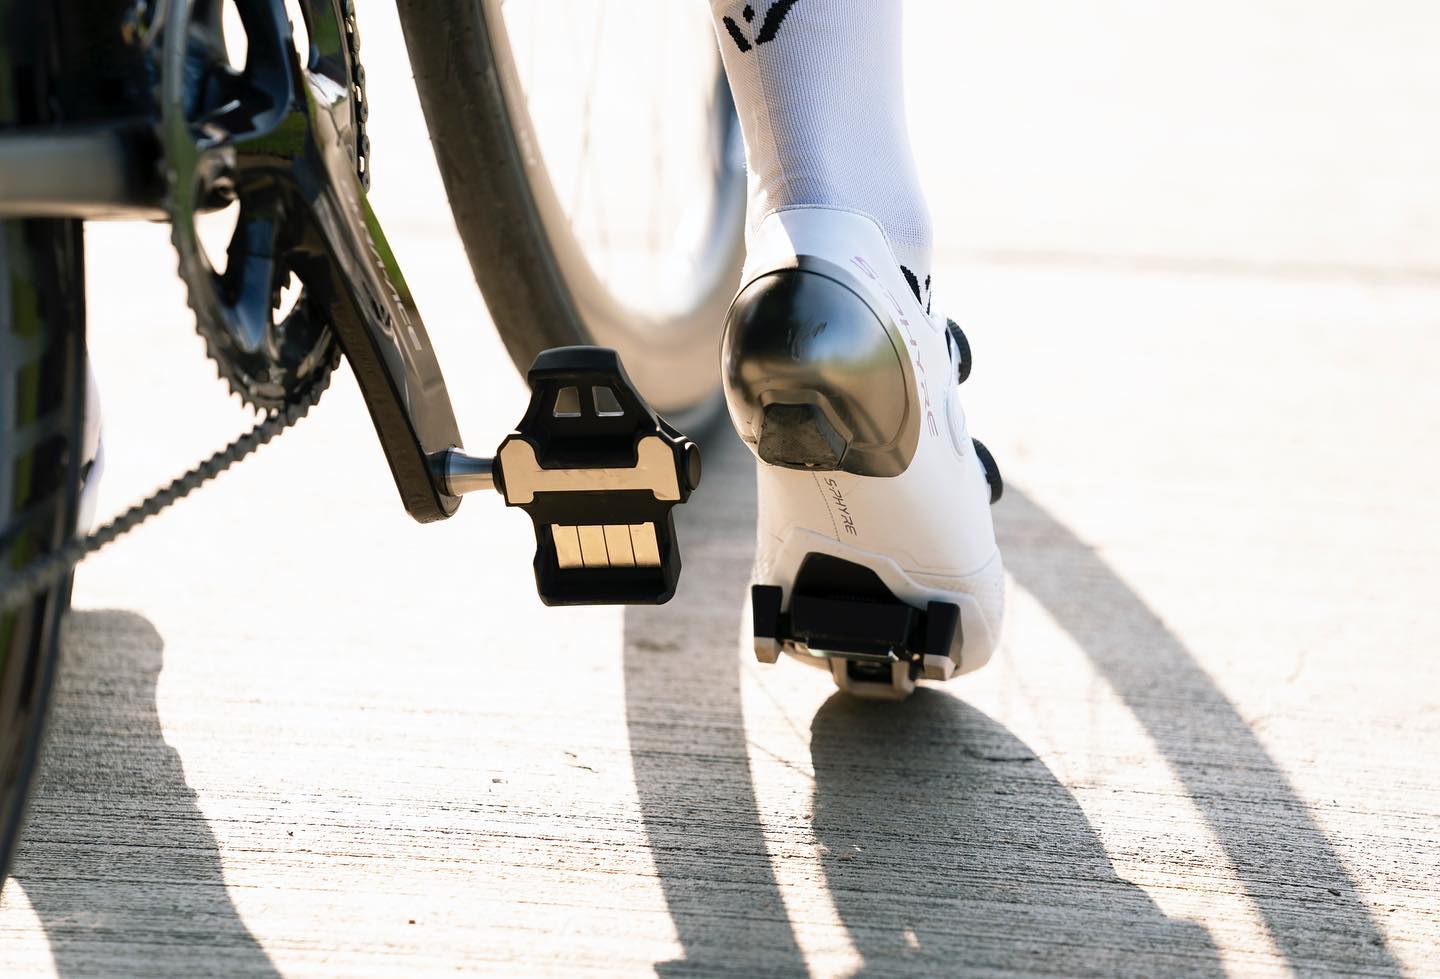 Bike Pedals & Cleats, Pedals for Bicycles